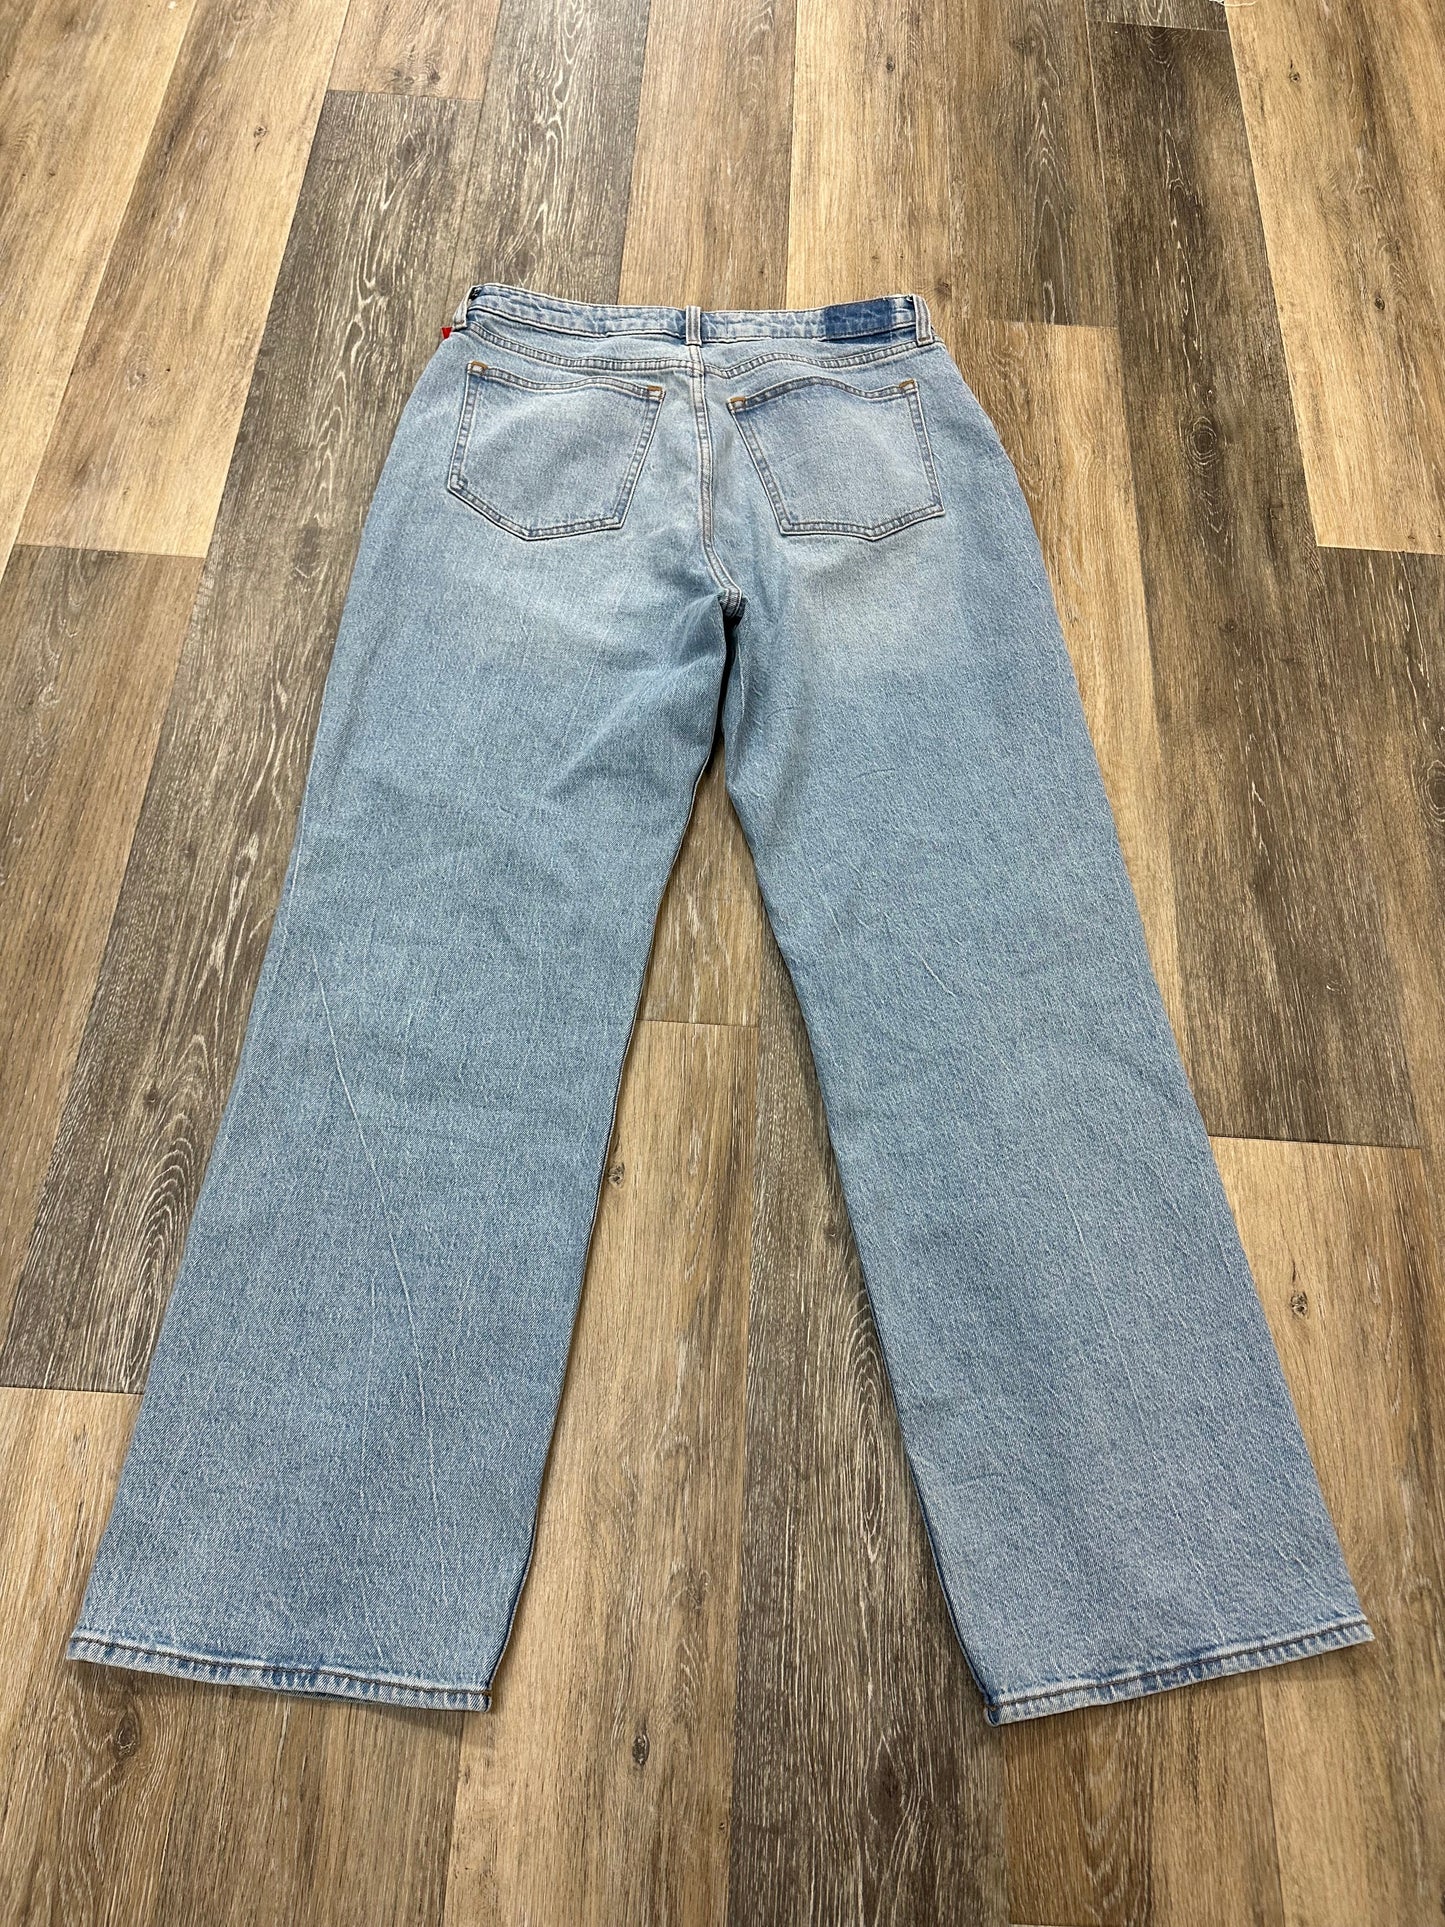 Blue Denim Jeans Straight Abercrombie And Fitch, Size 12